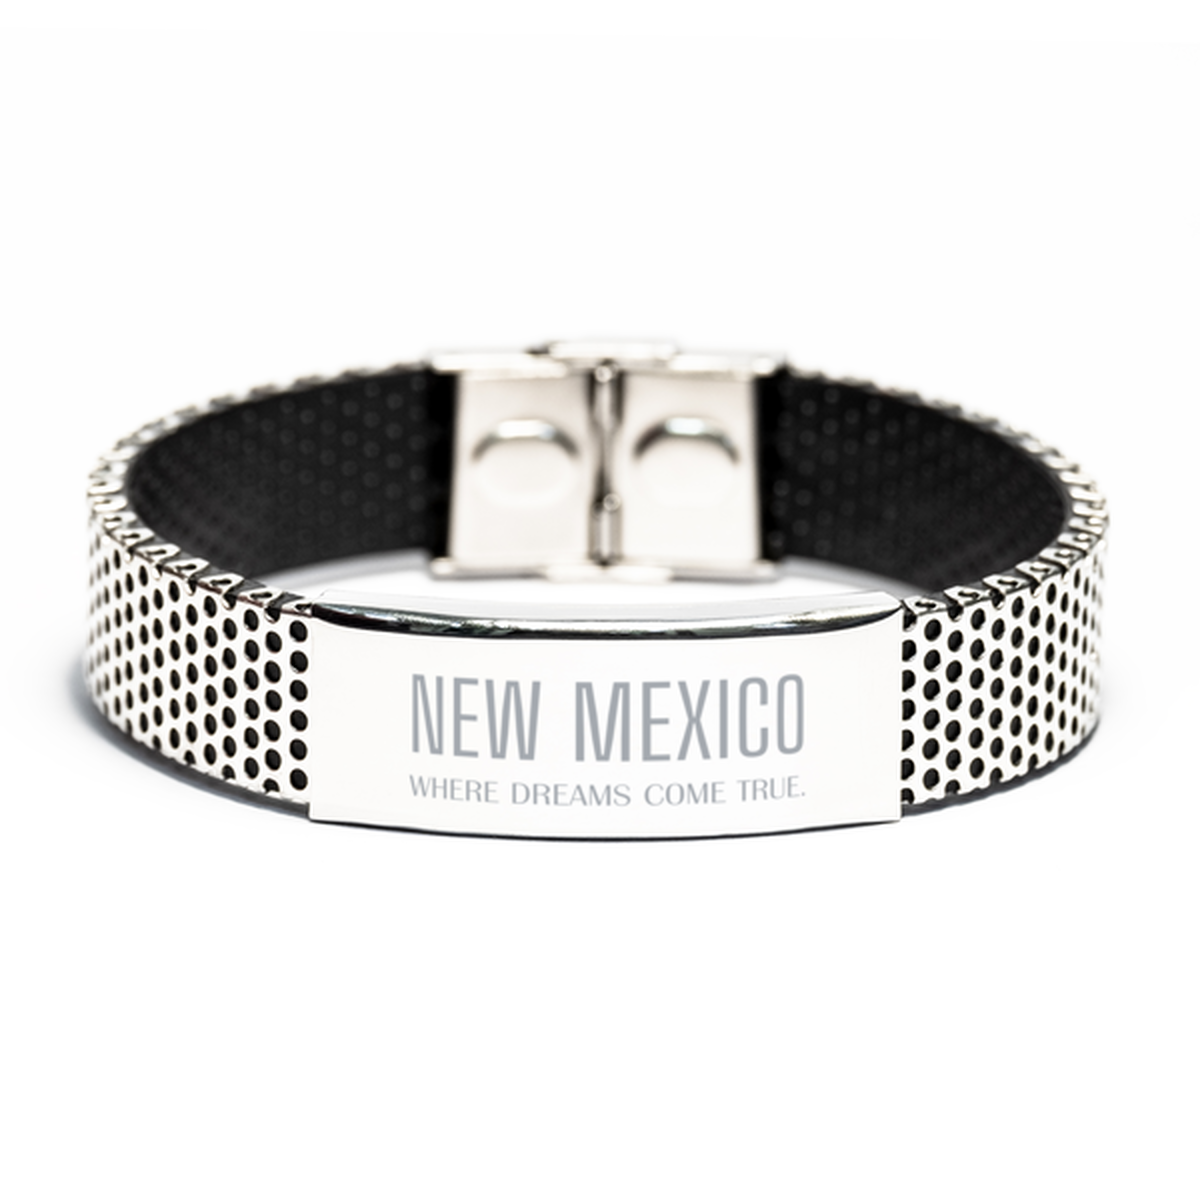 Love New Mexico State Stainless Steel Bracelet, New Mexico Where dreams come true, Birthday Inspirational Gifts For New Mexico Men, Women, Friends